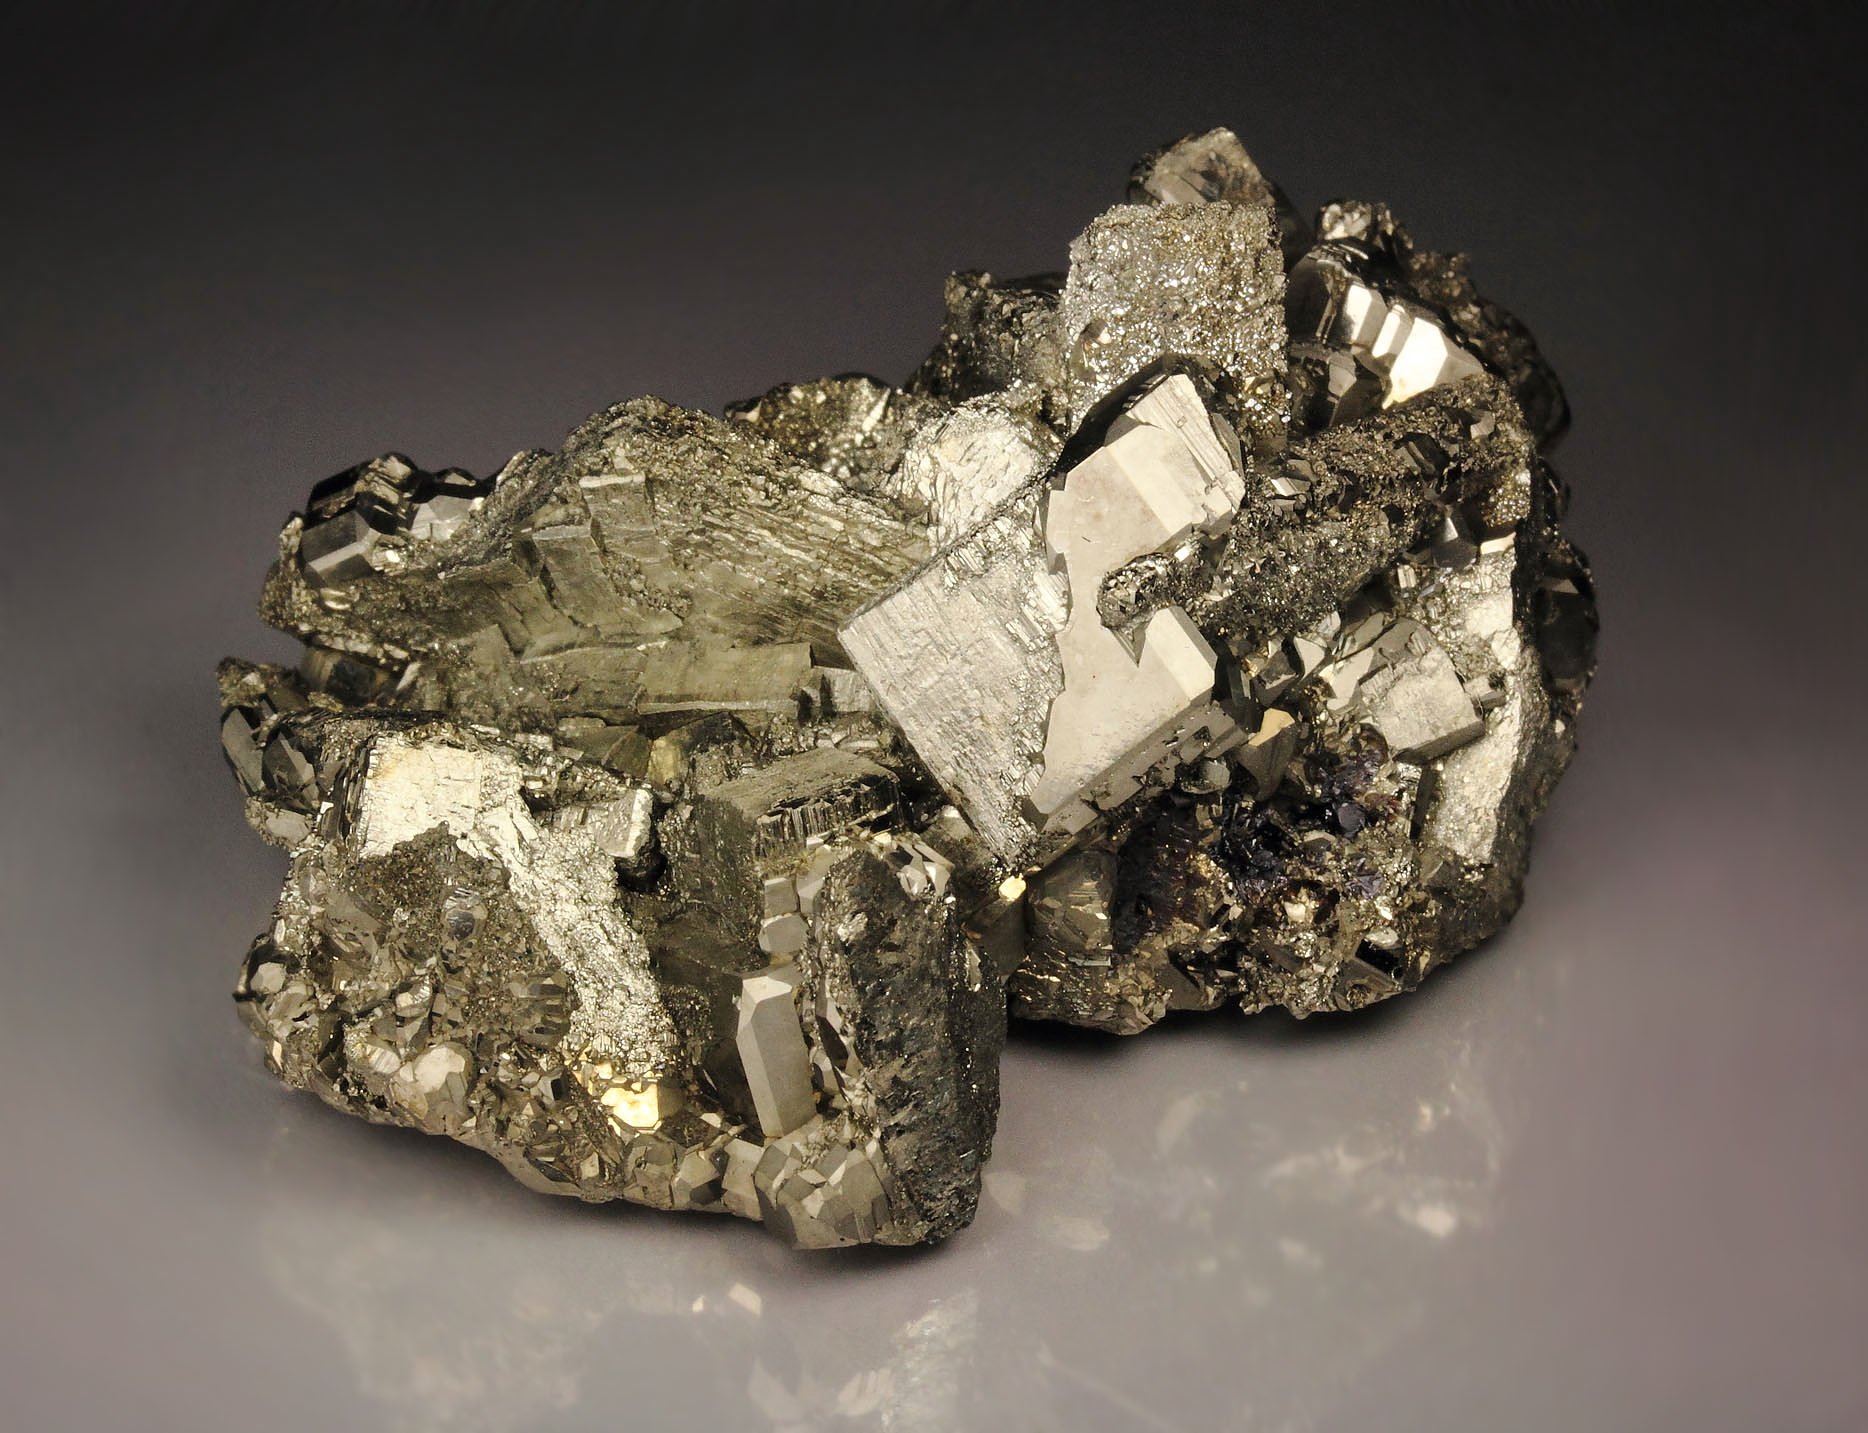 PYRITE pseudomorph after MARCASITE, epitaxial PYRITE